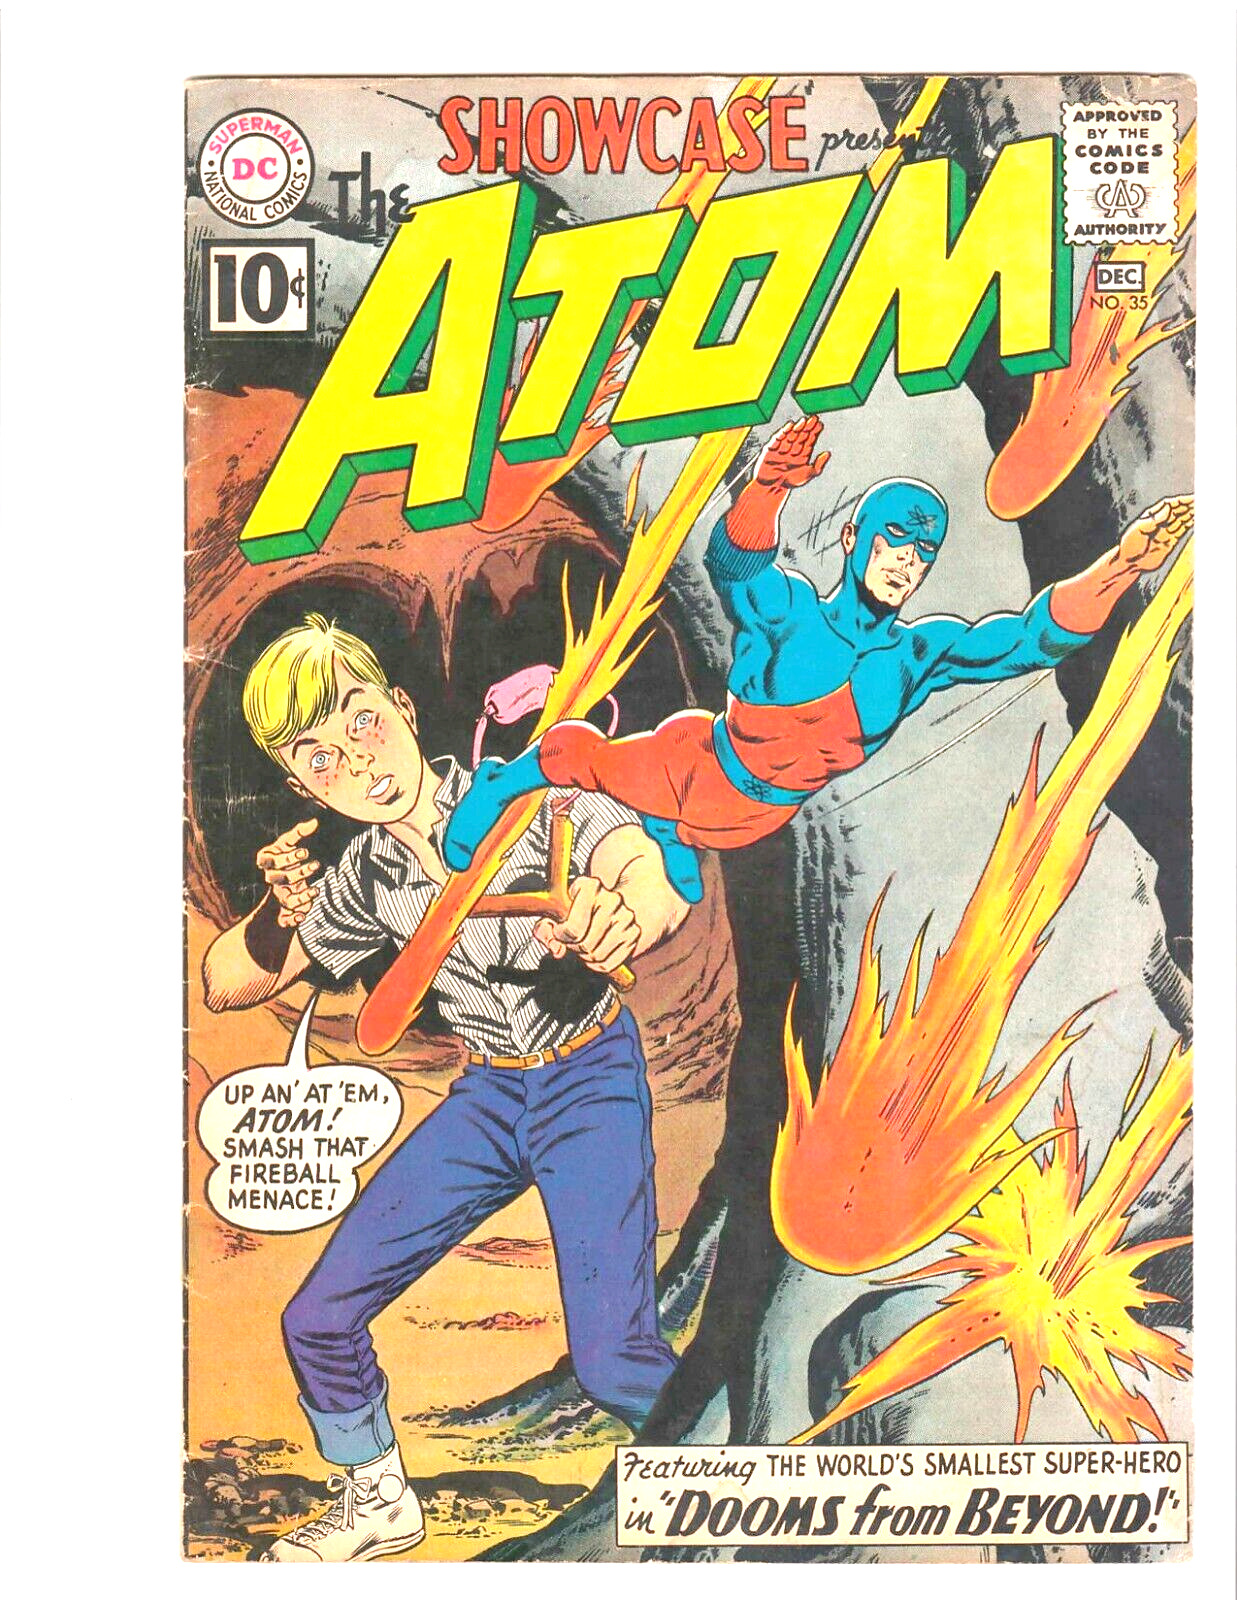 SHOWCASE 35 SILVER AGE - 2ND SILVER AGE ATOM  VG+  looks better